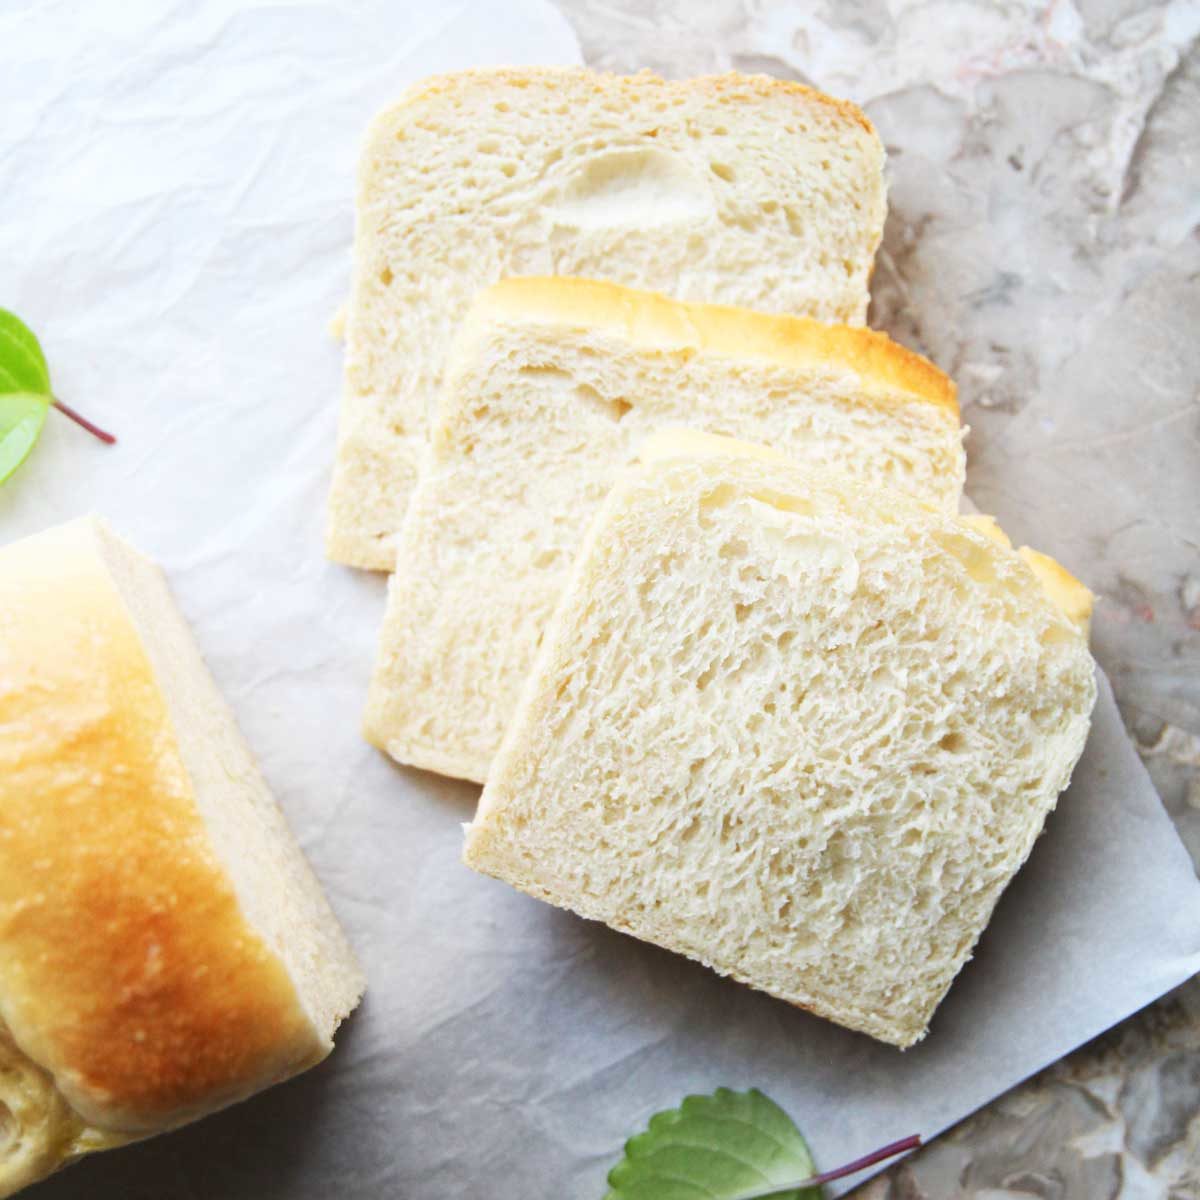 High Protein White Bread Recipe Made Using Silken Tofu - high protein white bread